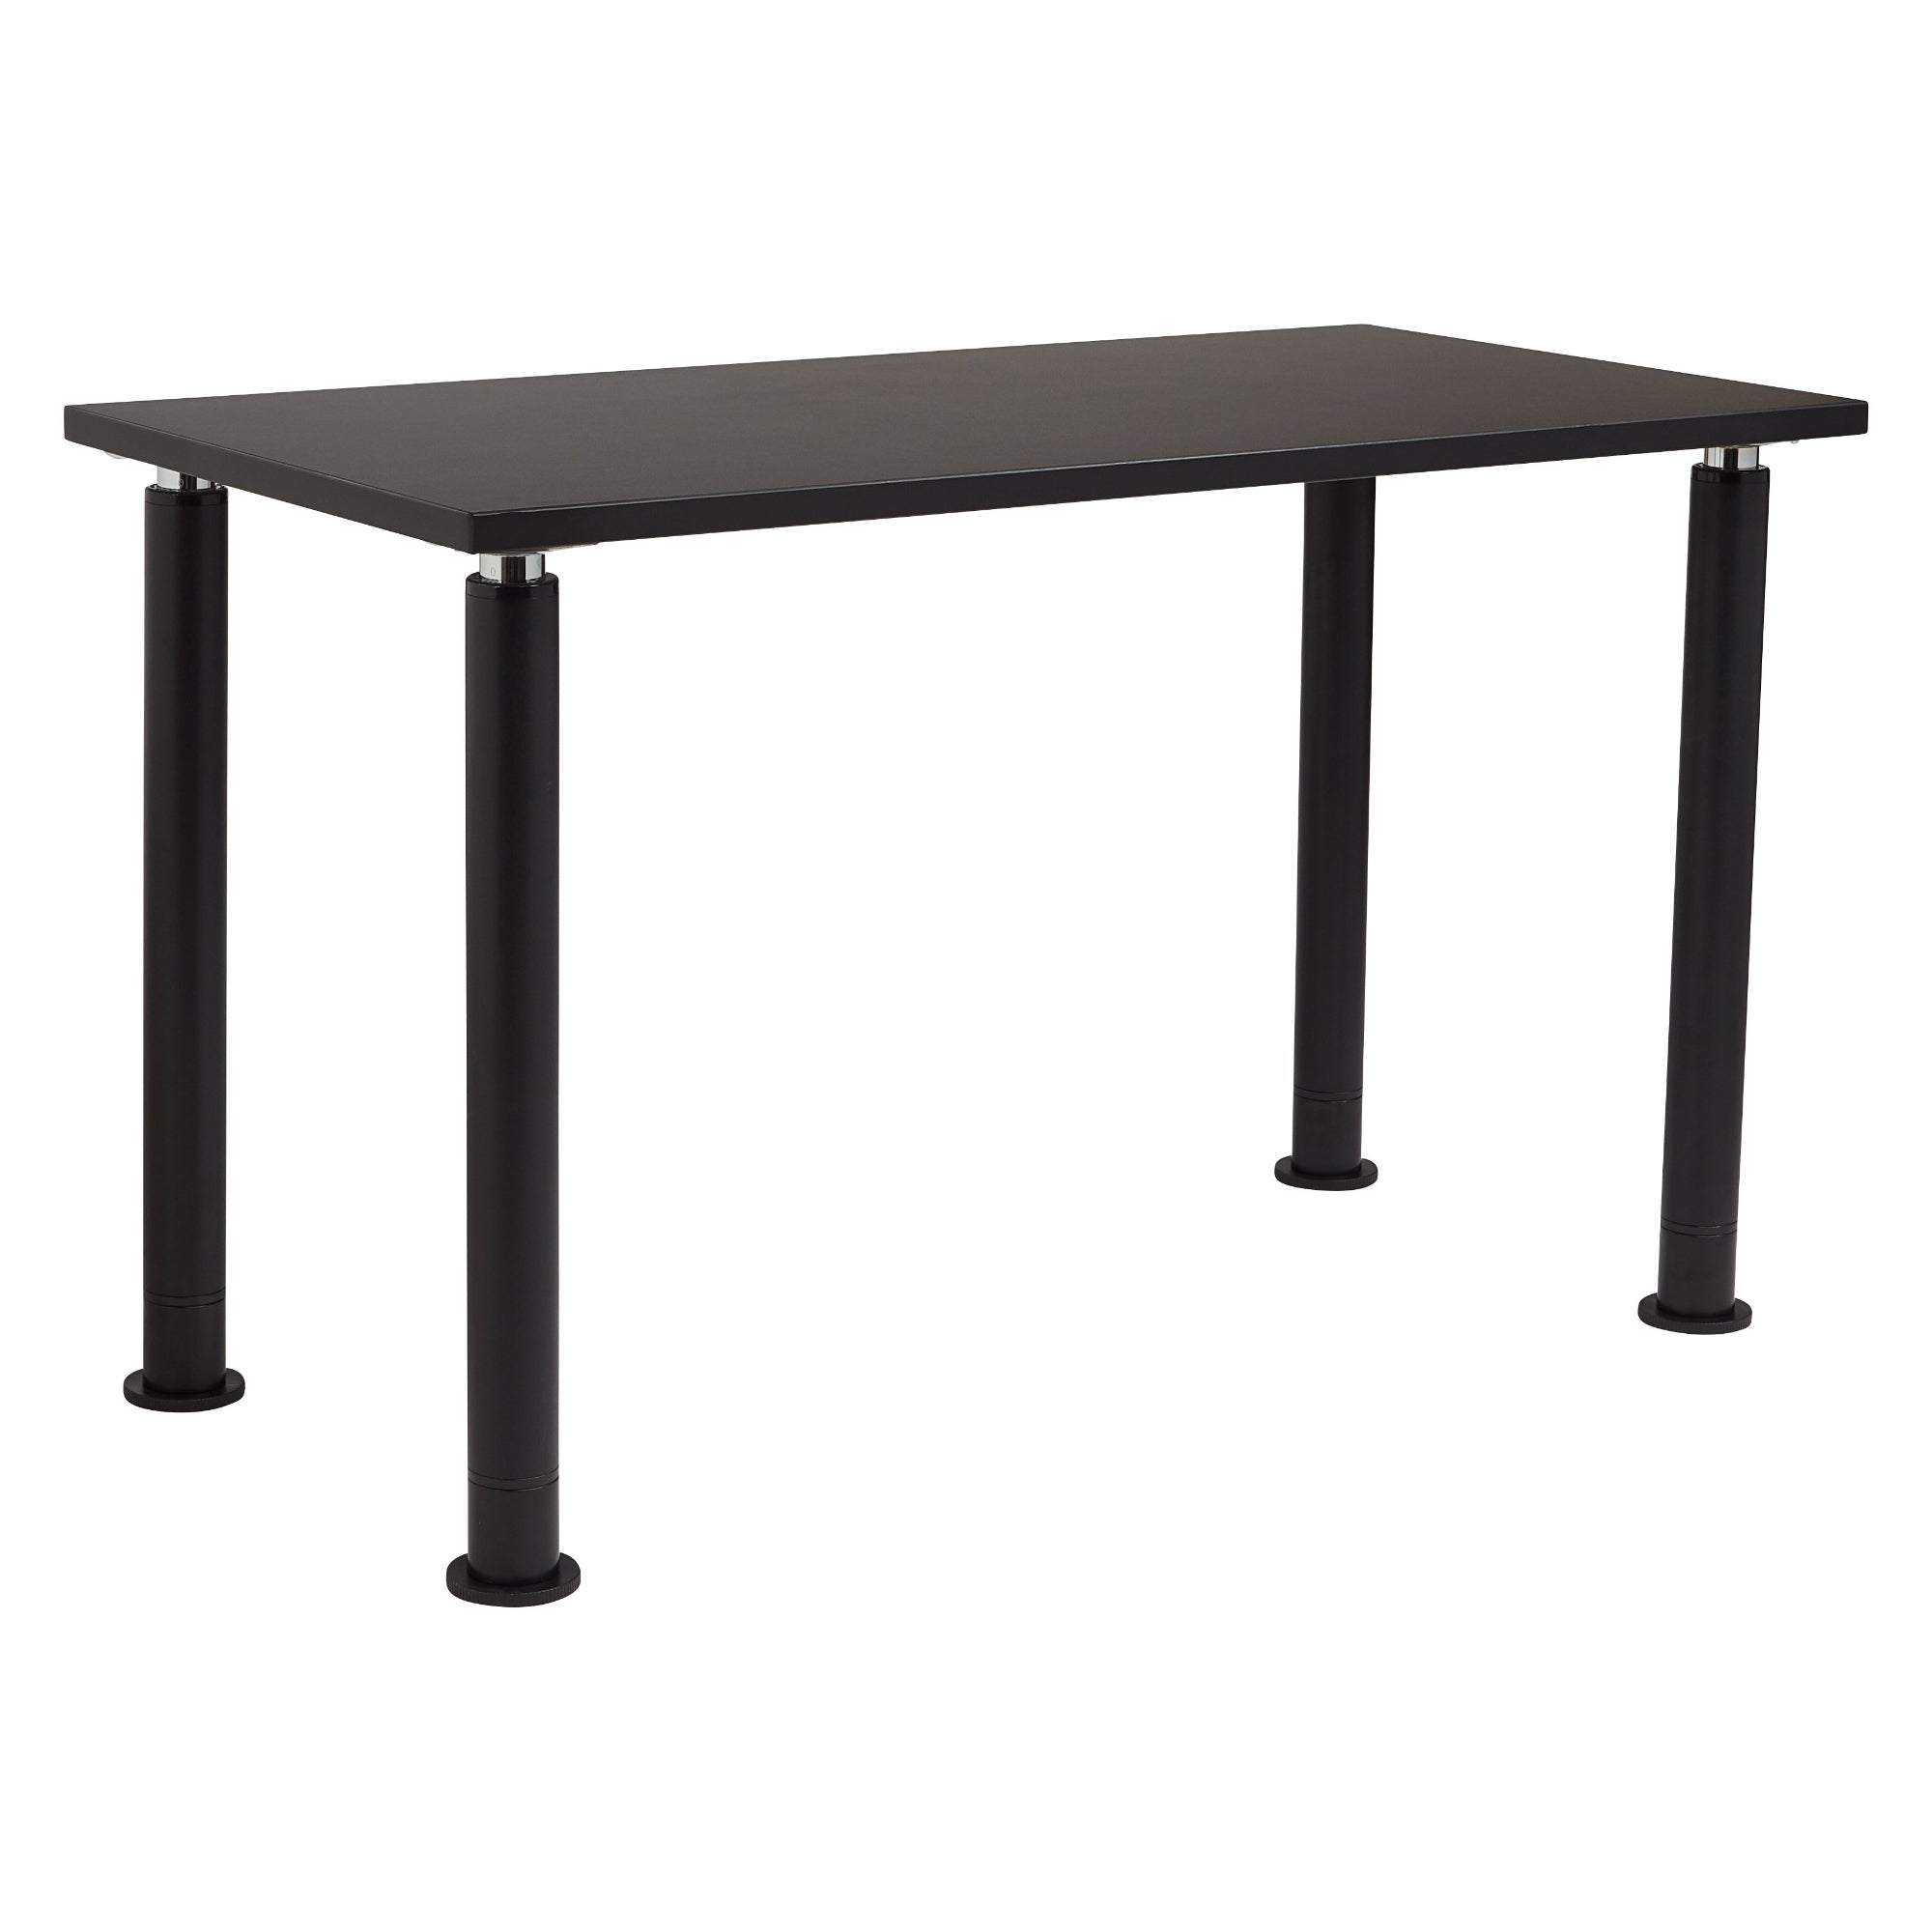 Designer Series Adjustable Height Science Table, 30" x 60" x 27"-42" H, Chemical Resistant Top